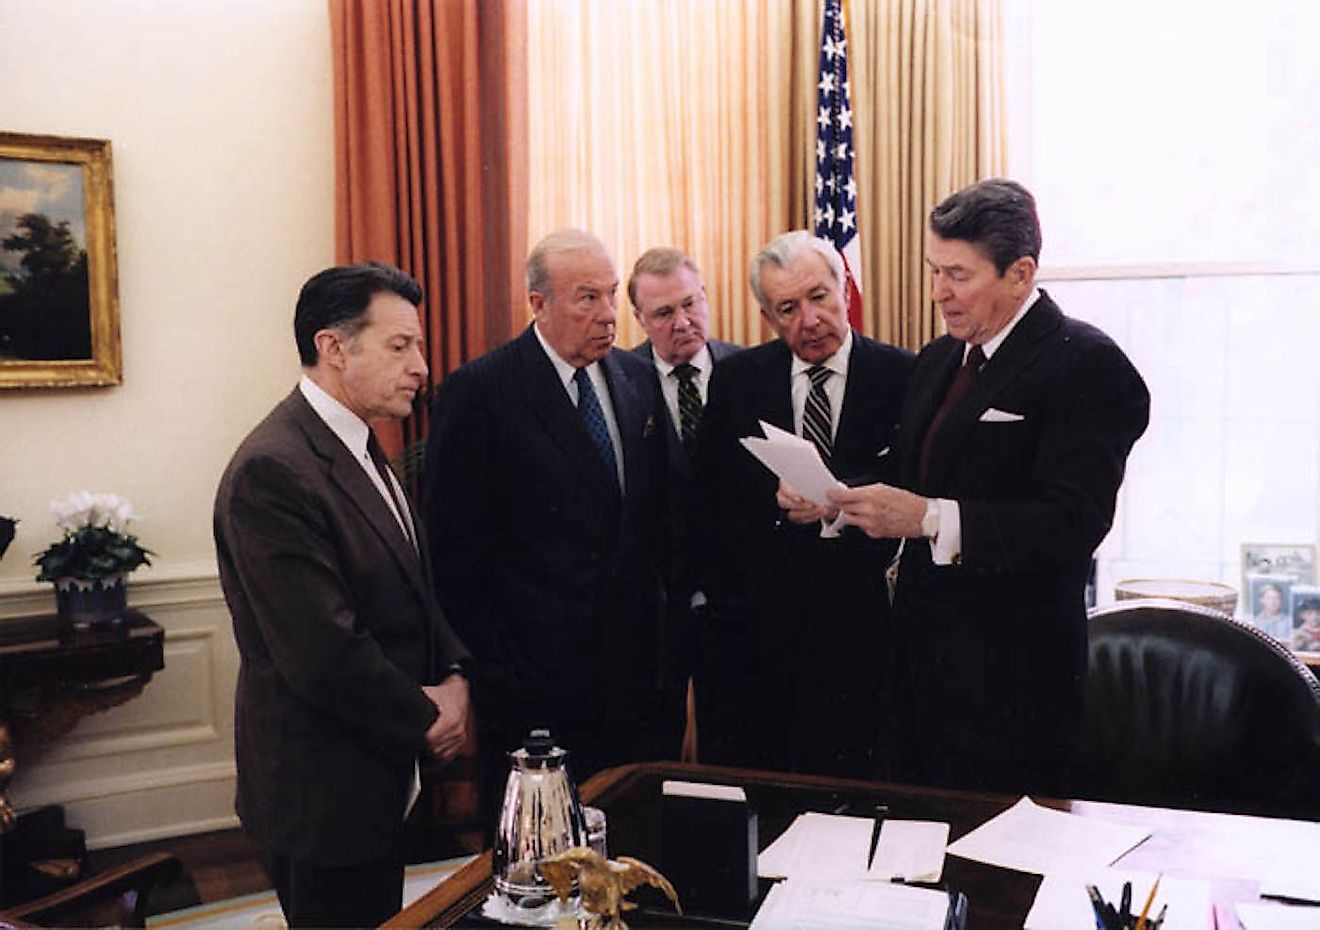 President Ronald Reagan with Caspar Weinberger, George Shultz, Ed Meese, and Don Regan discussing the President's remarks on the Iran-Contra affair, Oval Office. Image credit: White House Photo Office/Public domain